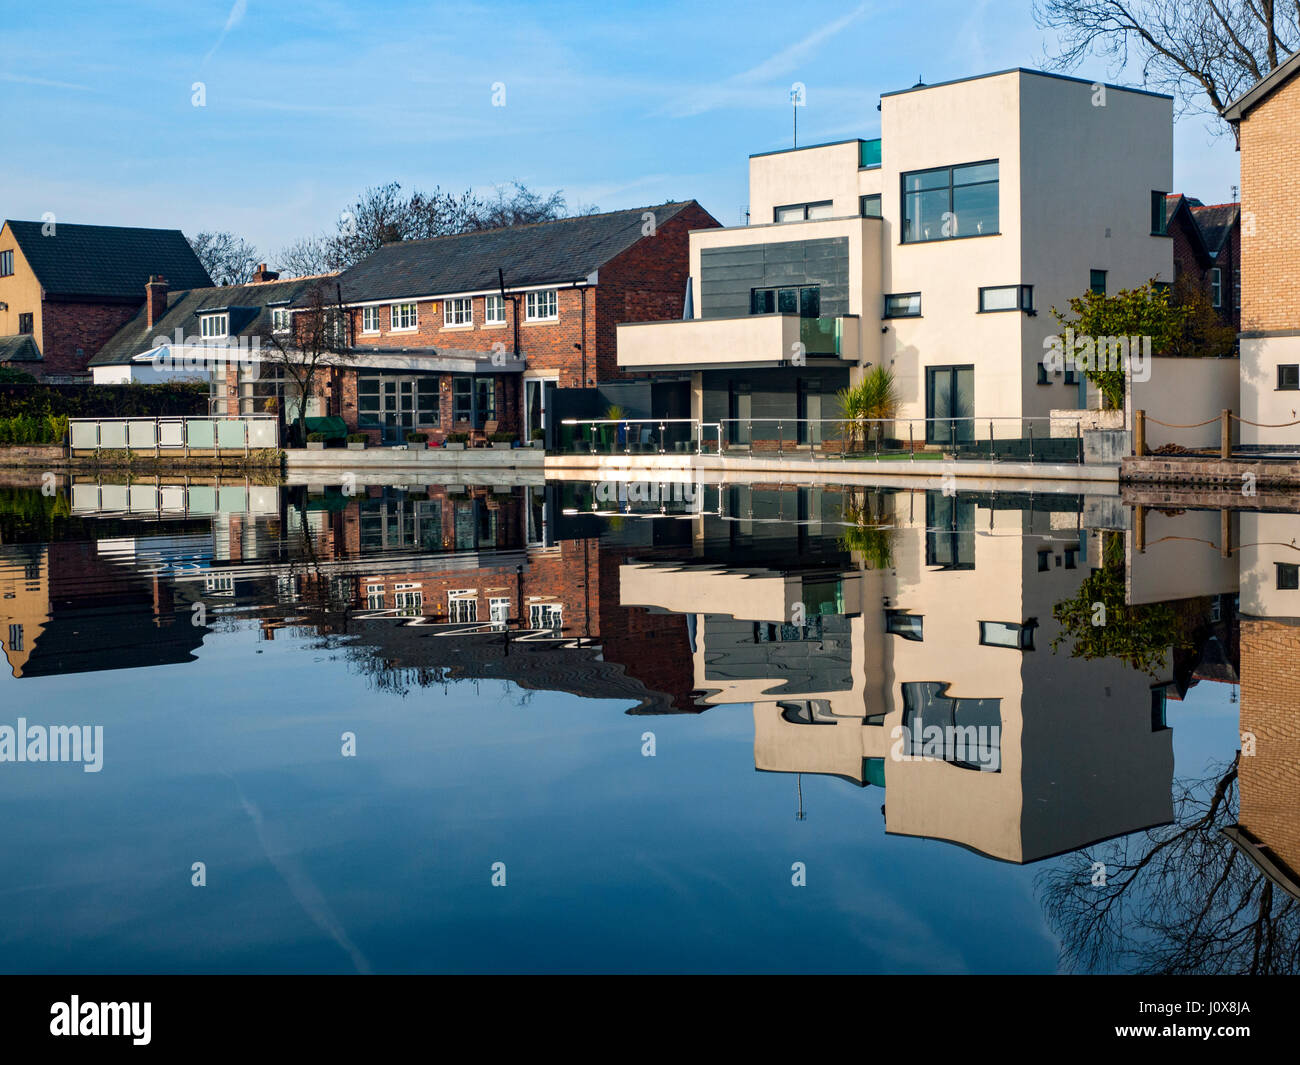 Canal side homes reflected in the Ashton Canal, Audenshaw, Tameside, Manchester, England, UK Stock Photo